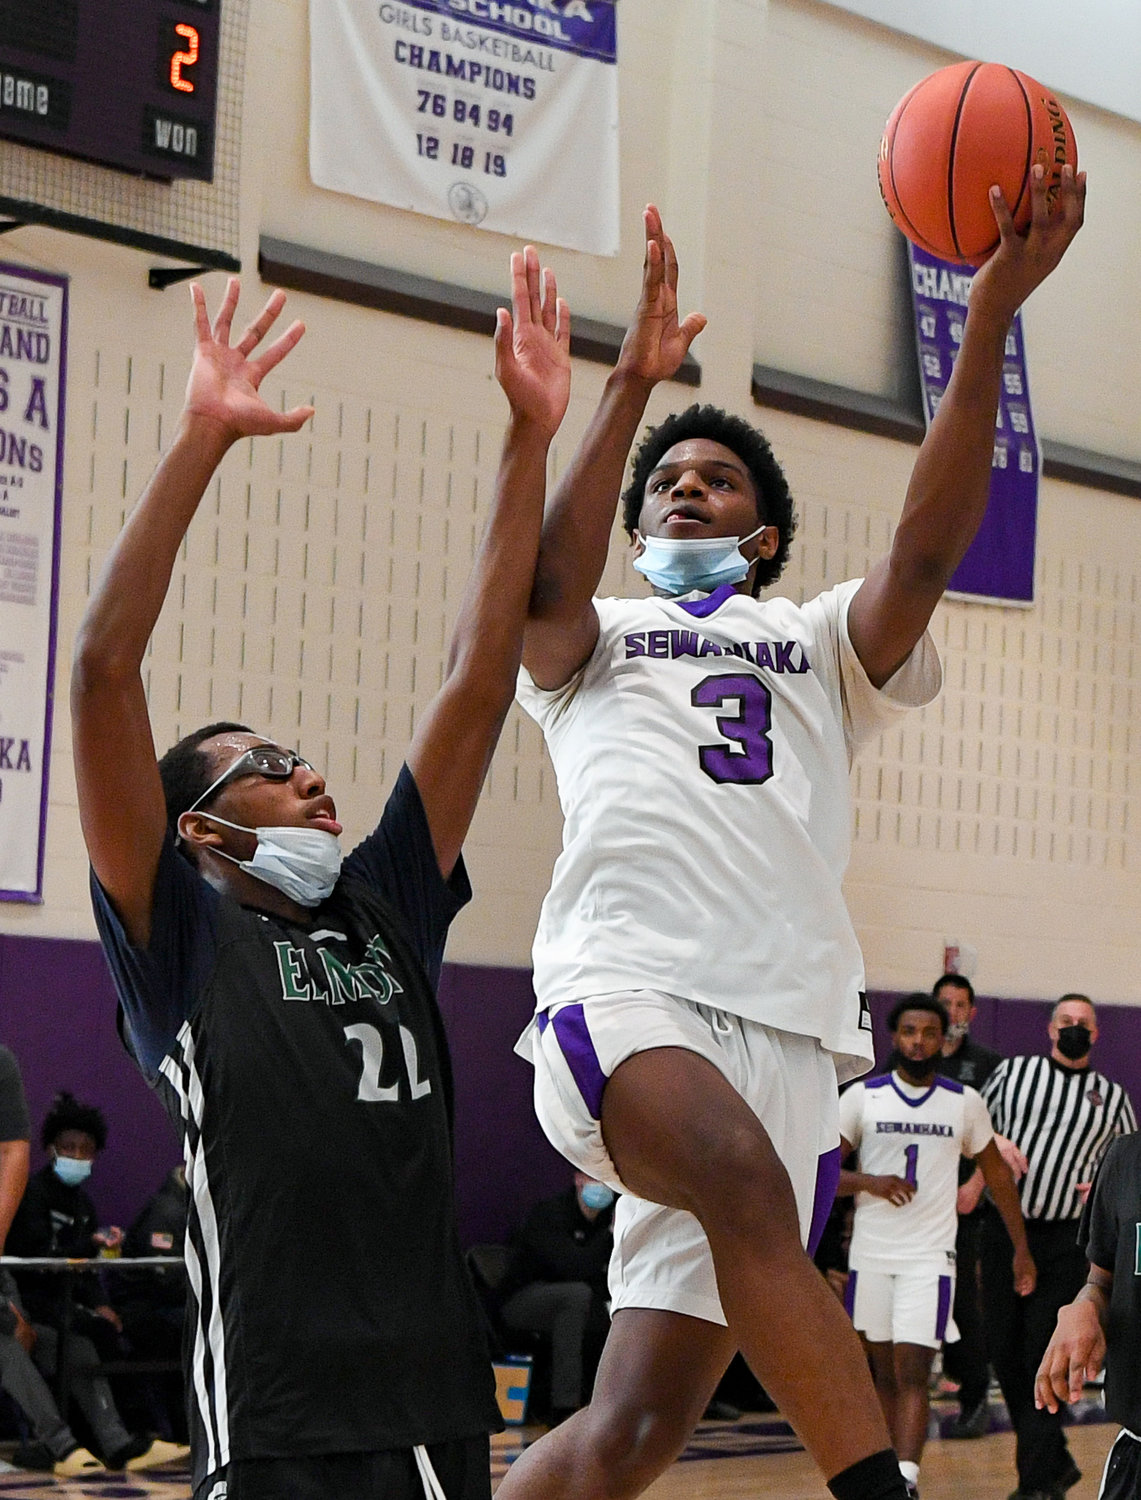 Senior J'Den Lloyd, right, went off for 28 points and 14 rebounds last Saturday as Sewanhaka cruised past visiting Elmont by 26.